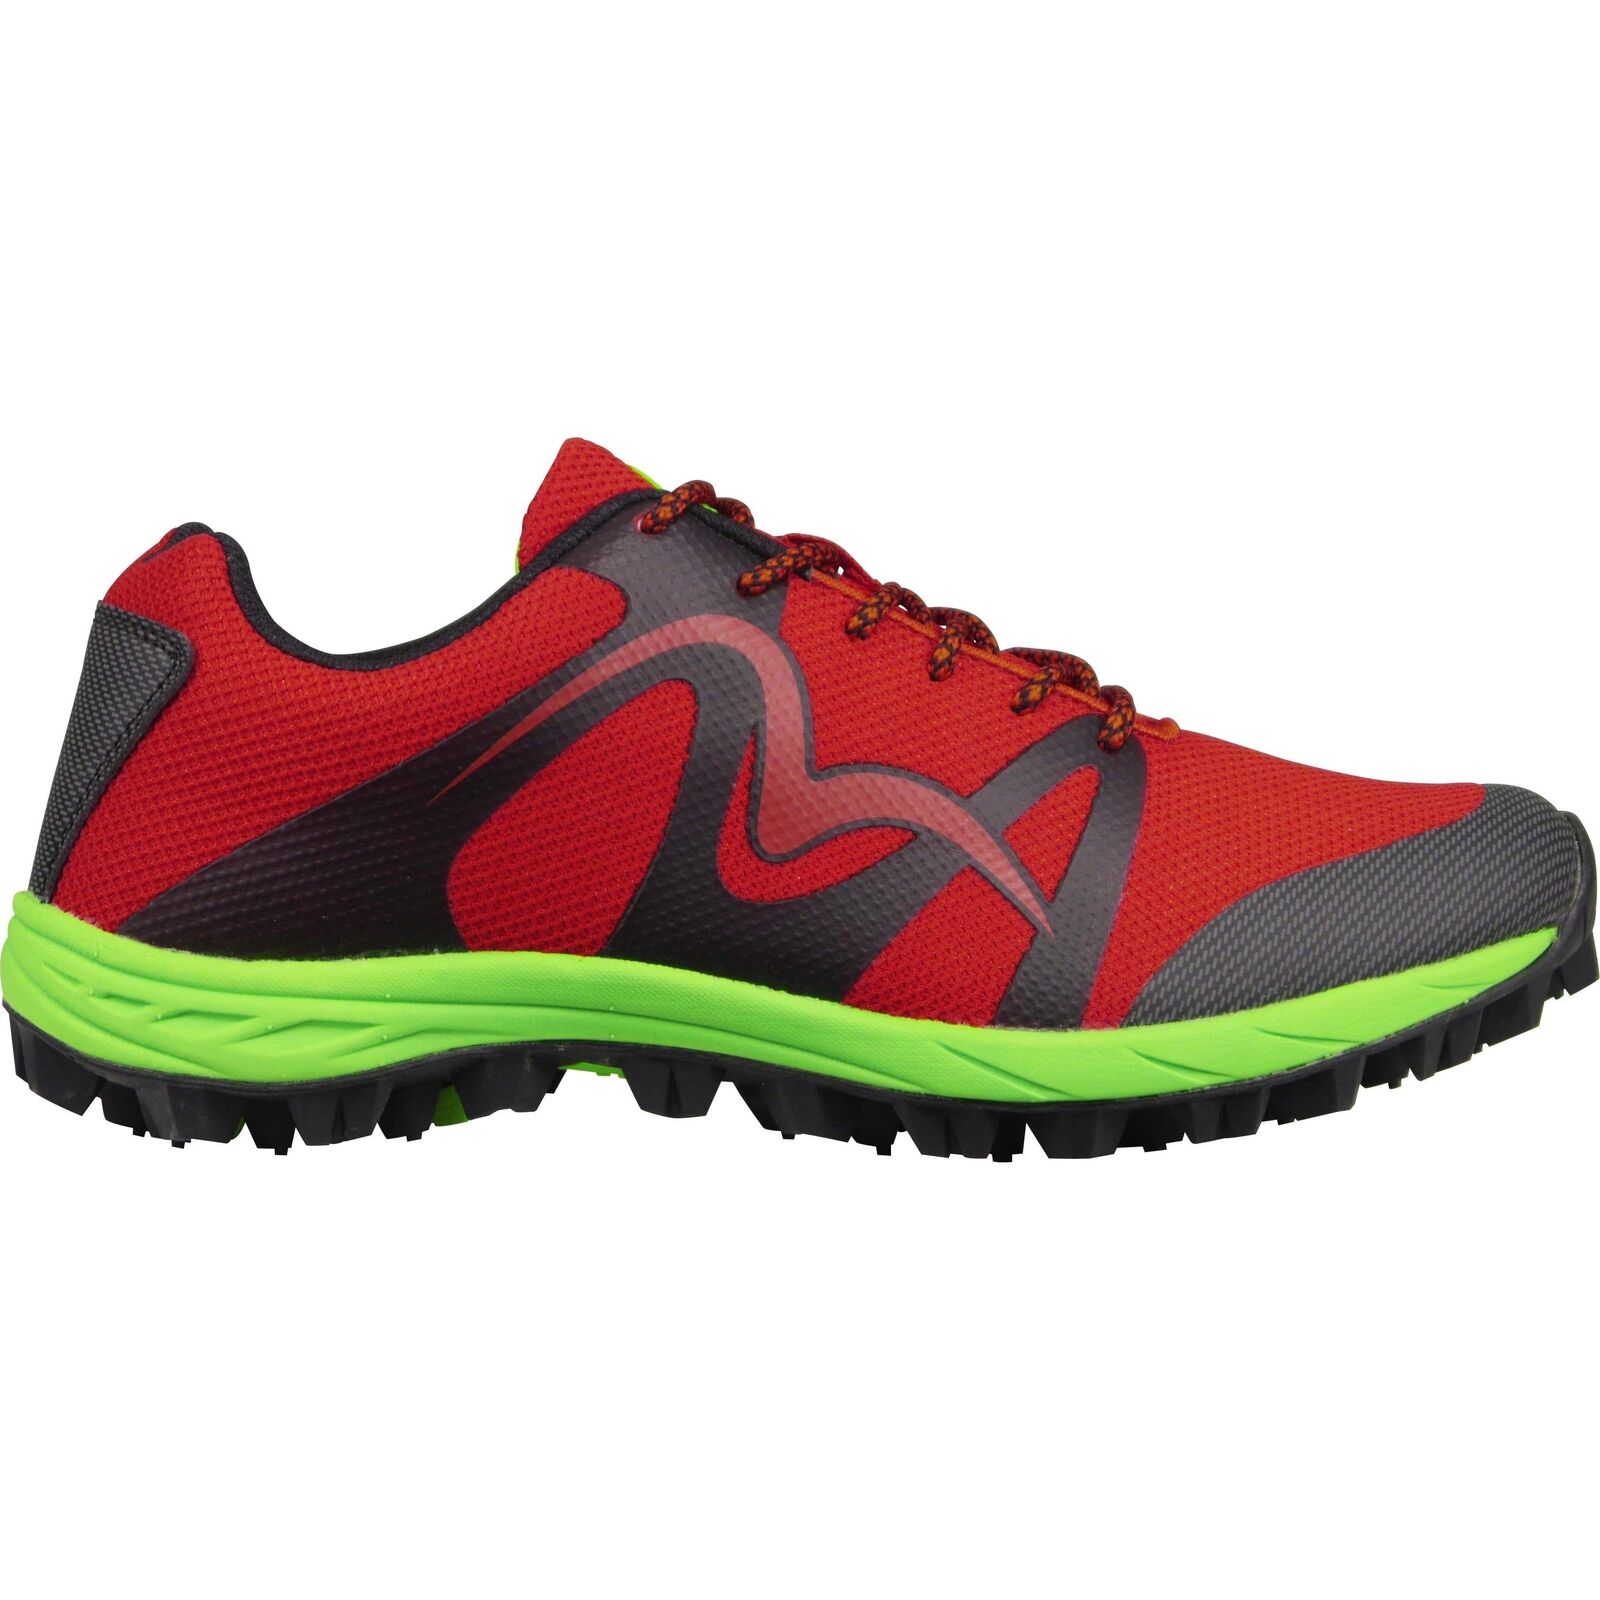 More Mile Cheviot Trail Running Shoes Red